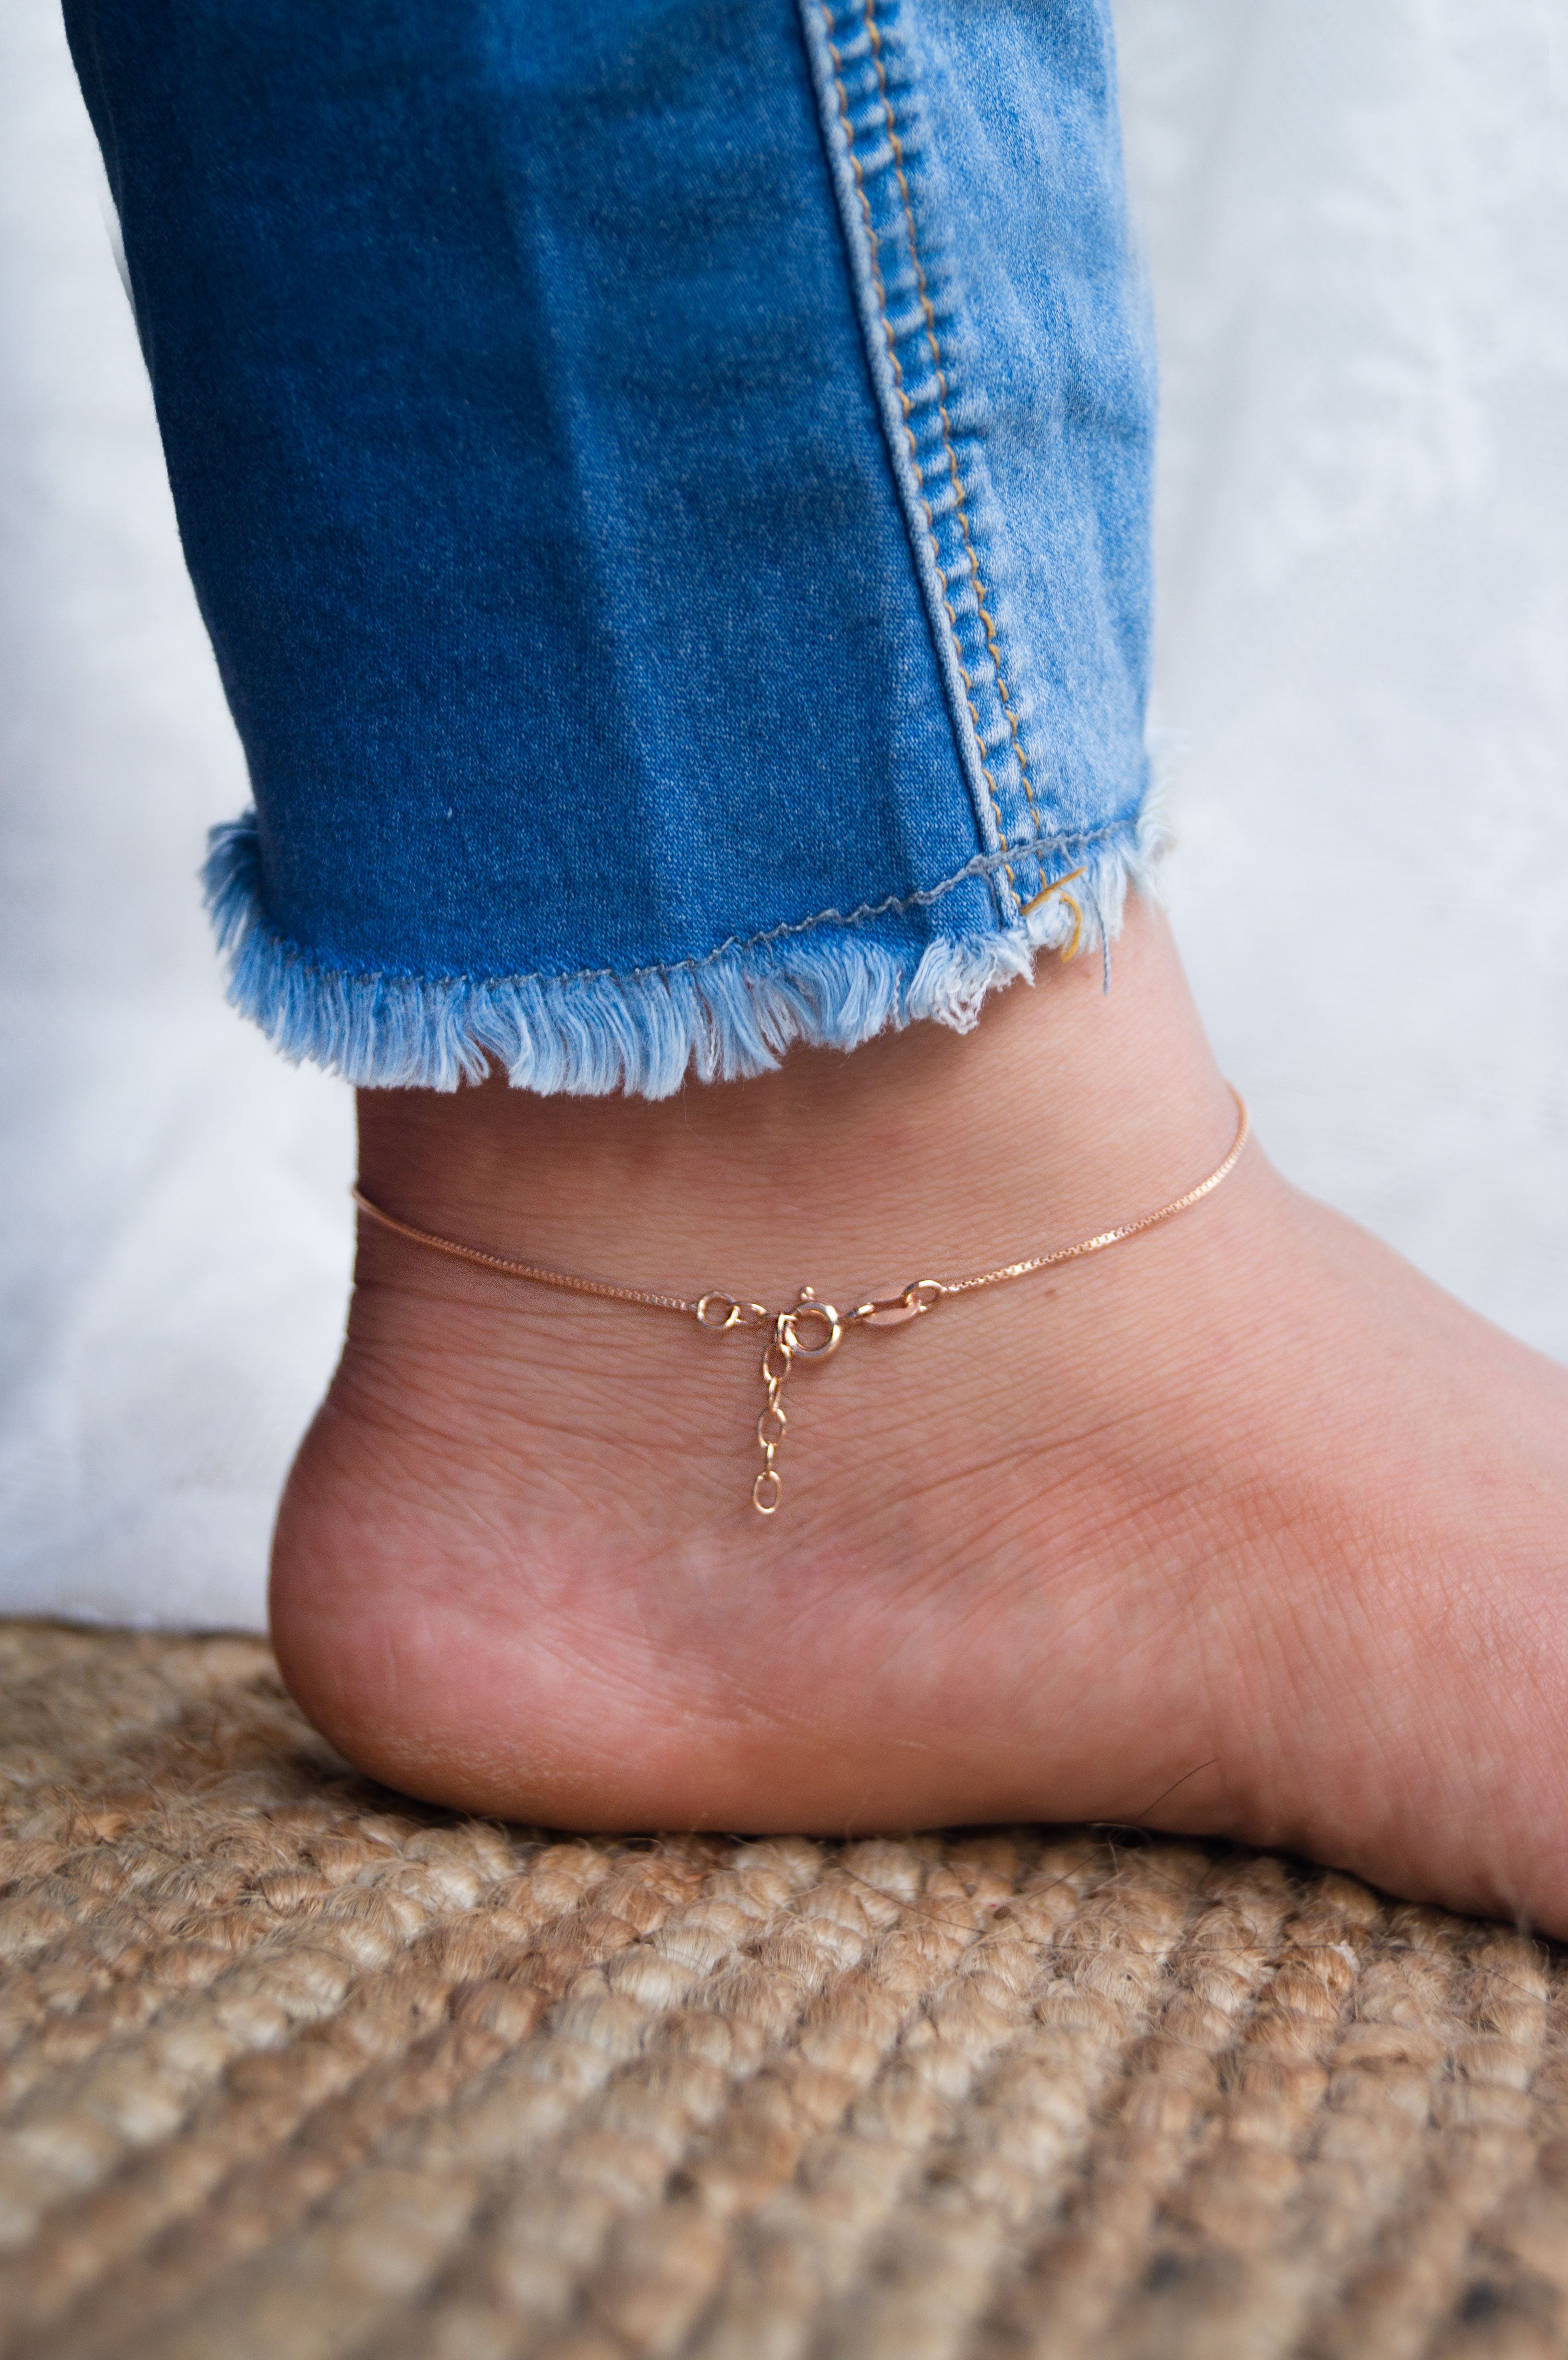 Boho Jewelry // Boho Anklet for Women // Ankle Bracelet // Shell Anklet //  Beach Anklet // Beach Jewelry / Anklet for Women / Foot Bracelet - Etsy UK  | Ankle bracelets, Foot bracelet, Anklet jewelry